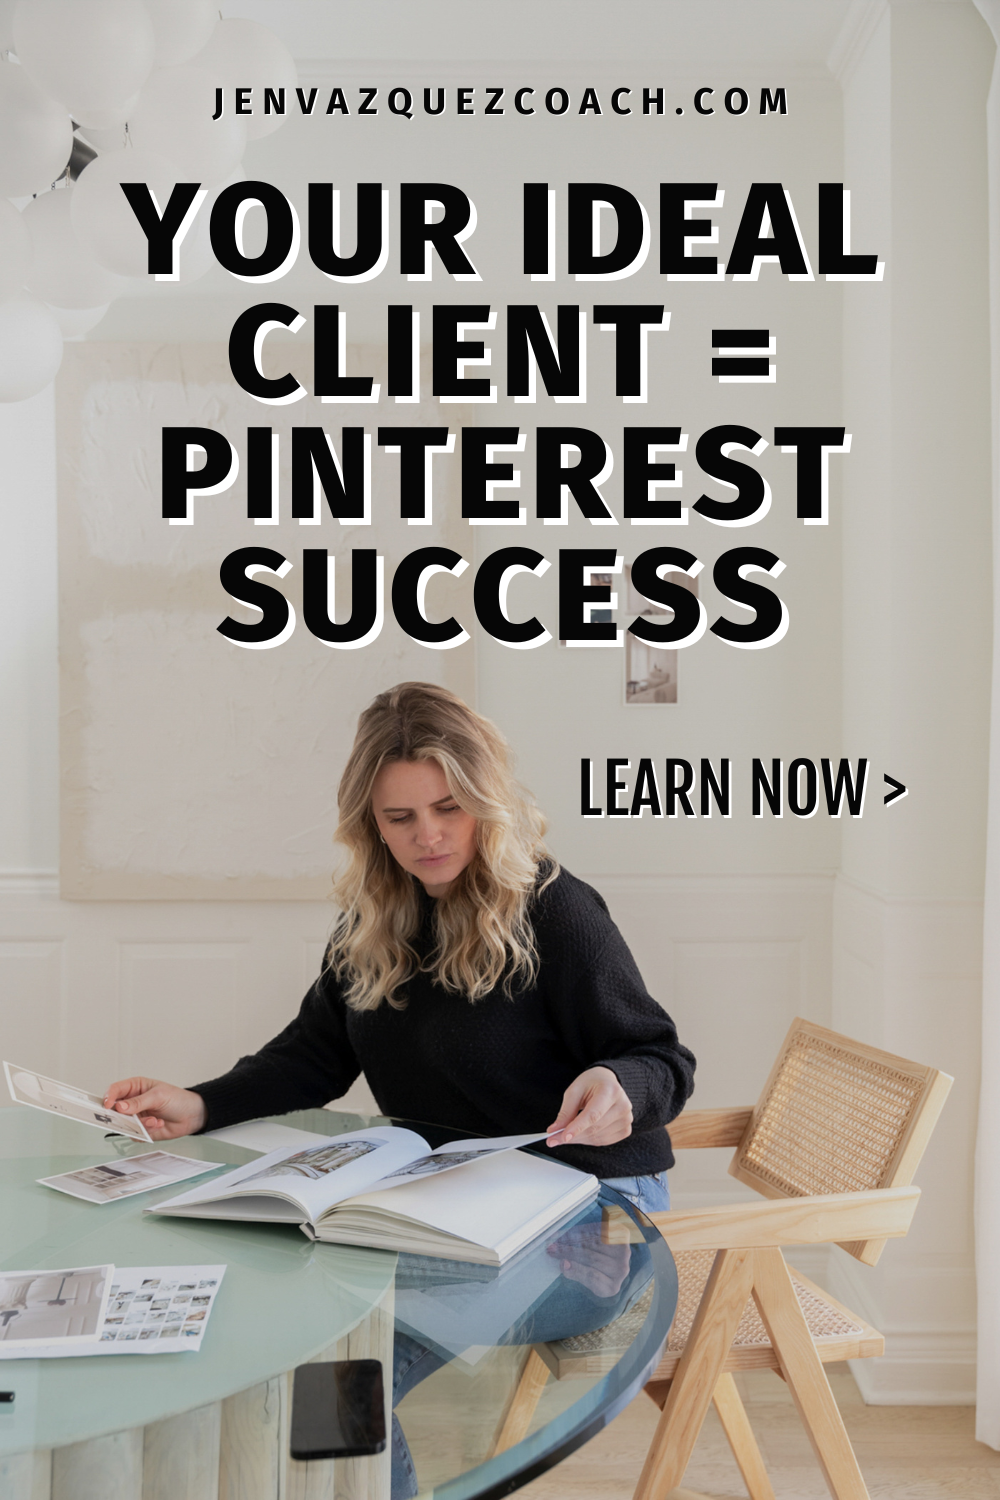 Women working at a kitchen table with blonde hair and a black sweater. Ideal client = Pinterest Success